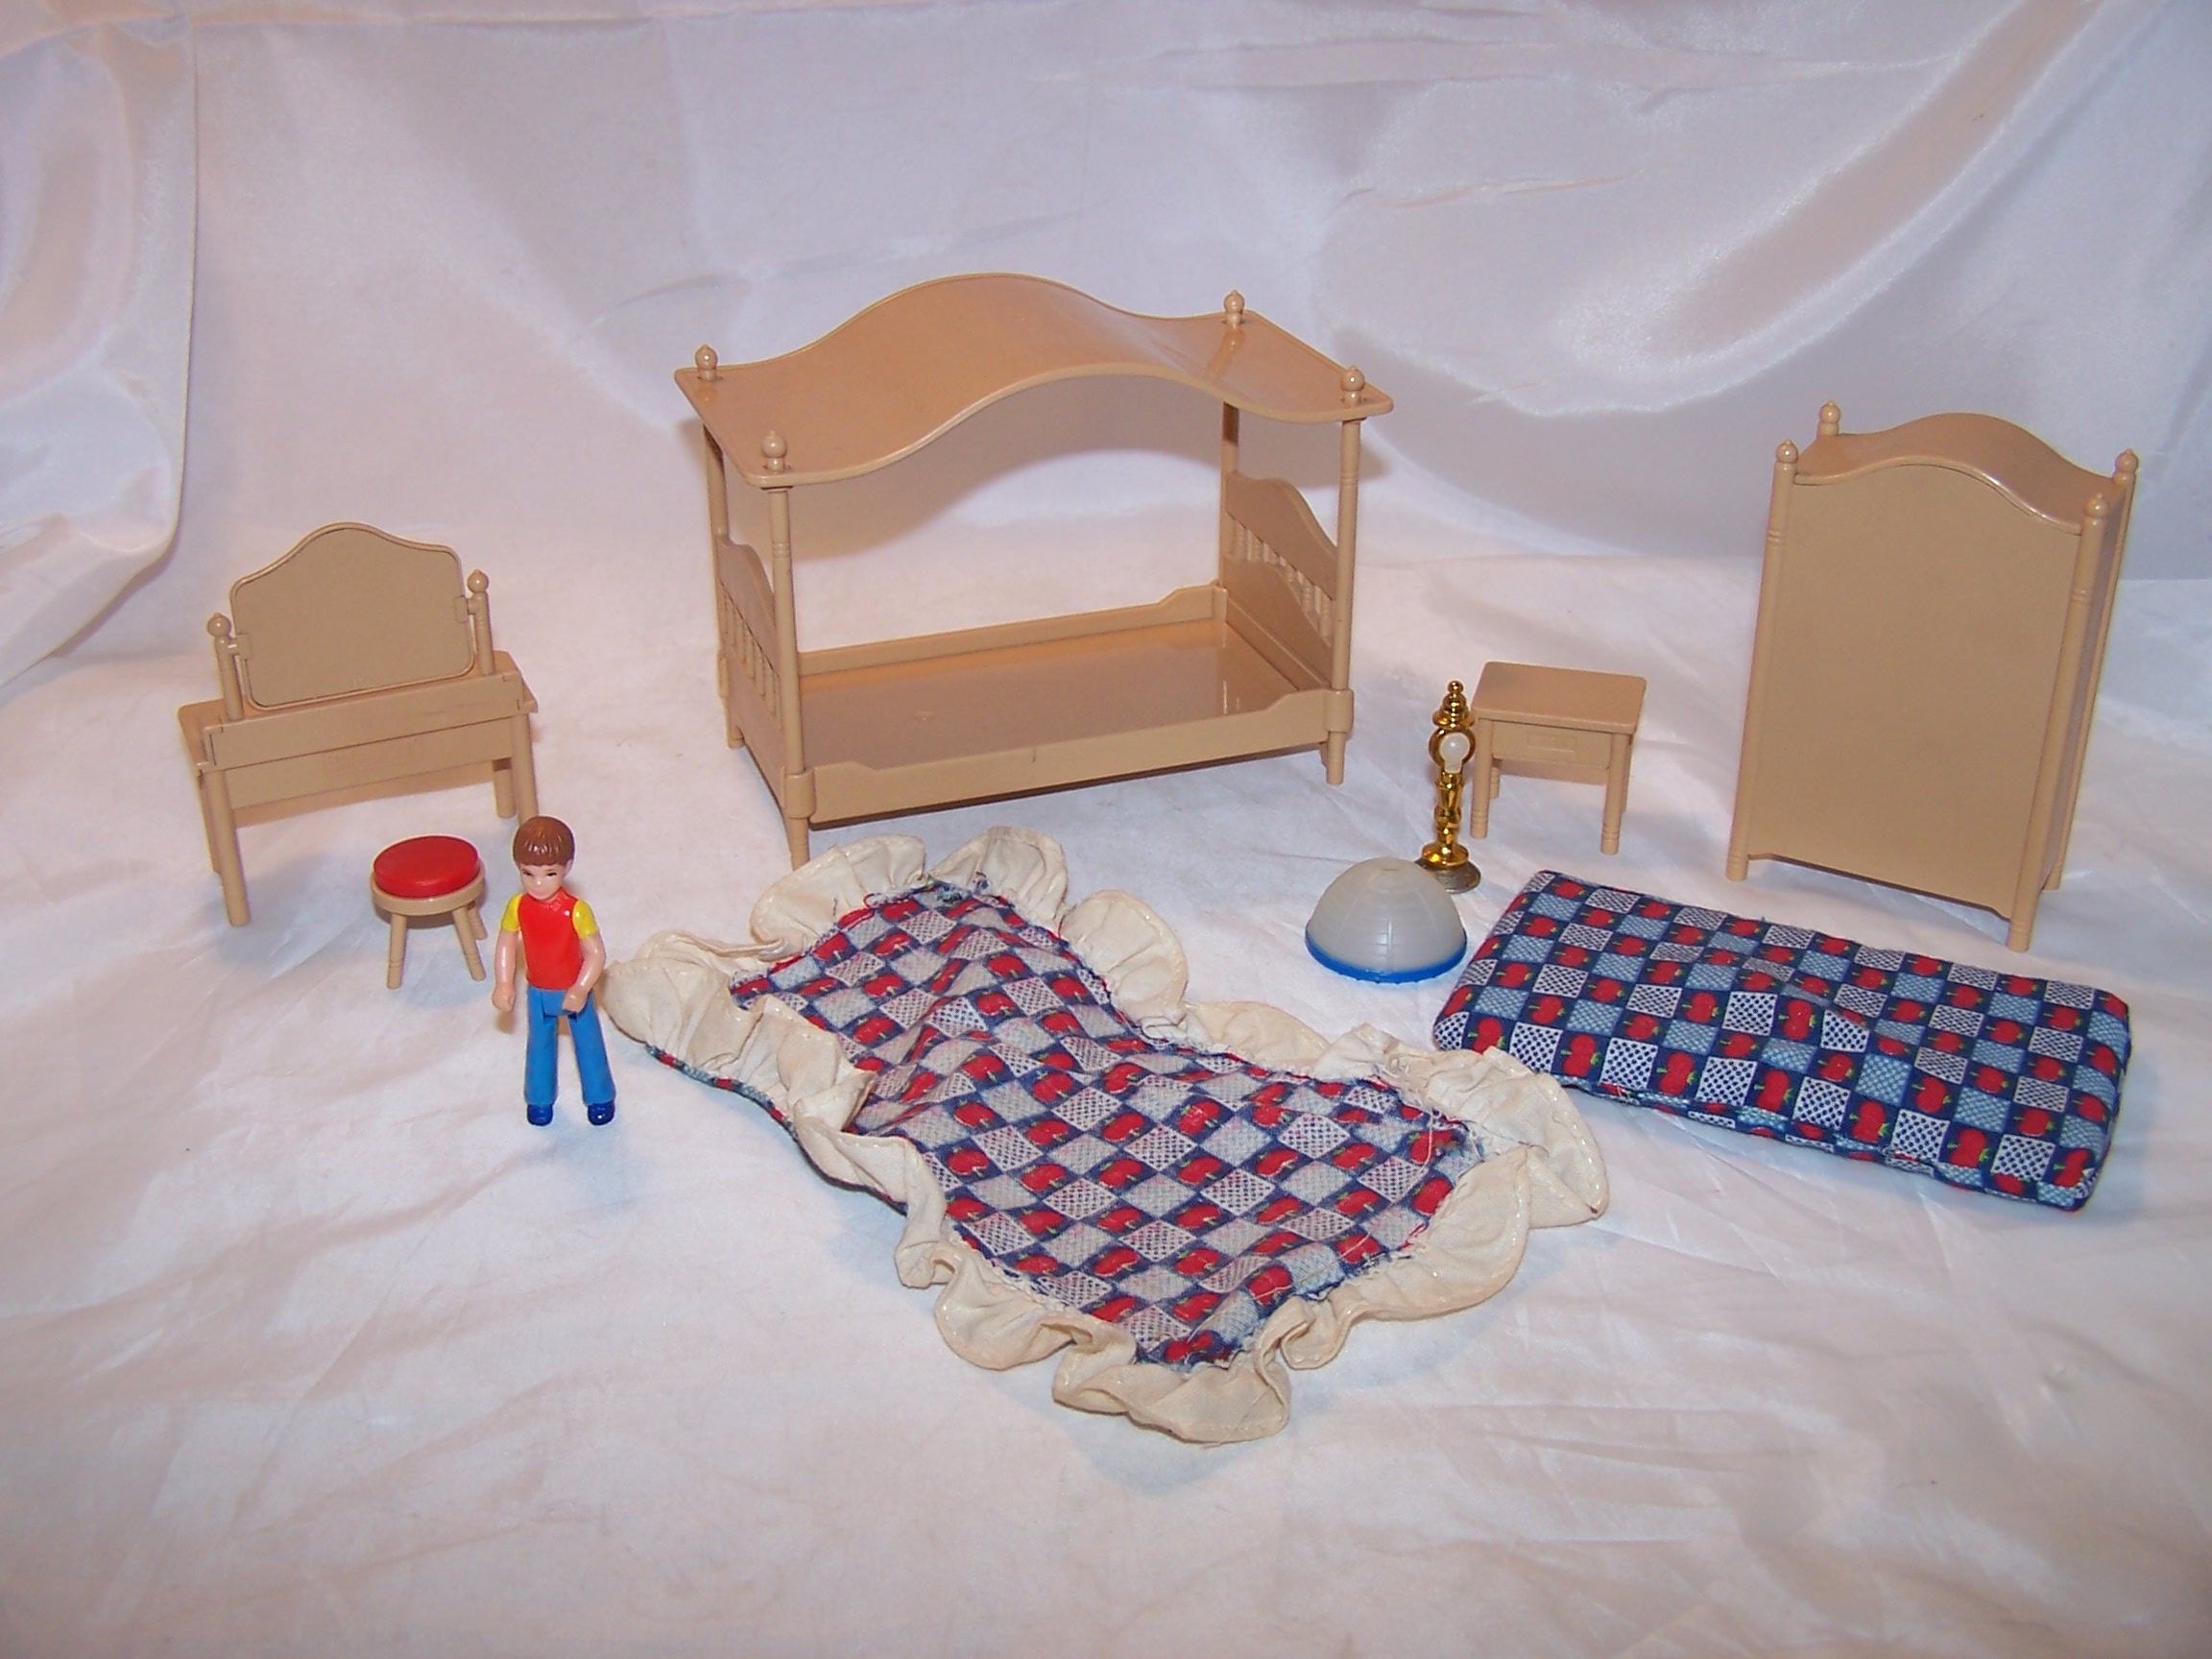 Image 27 of Dollhouse w Family, Furniture, Tomy